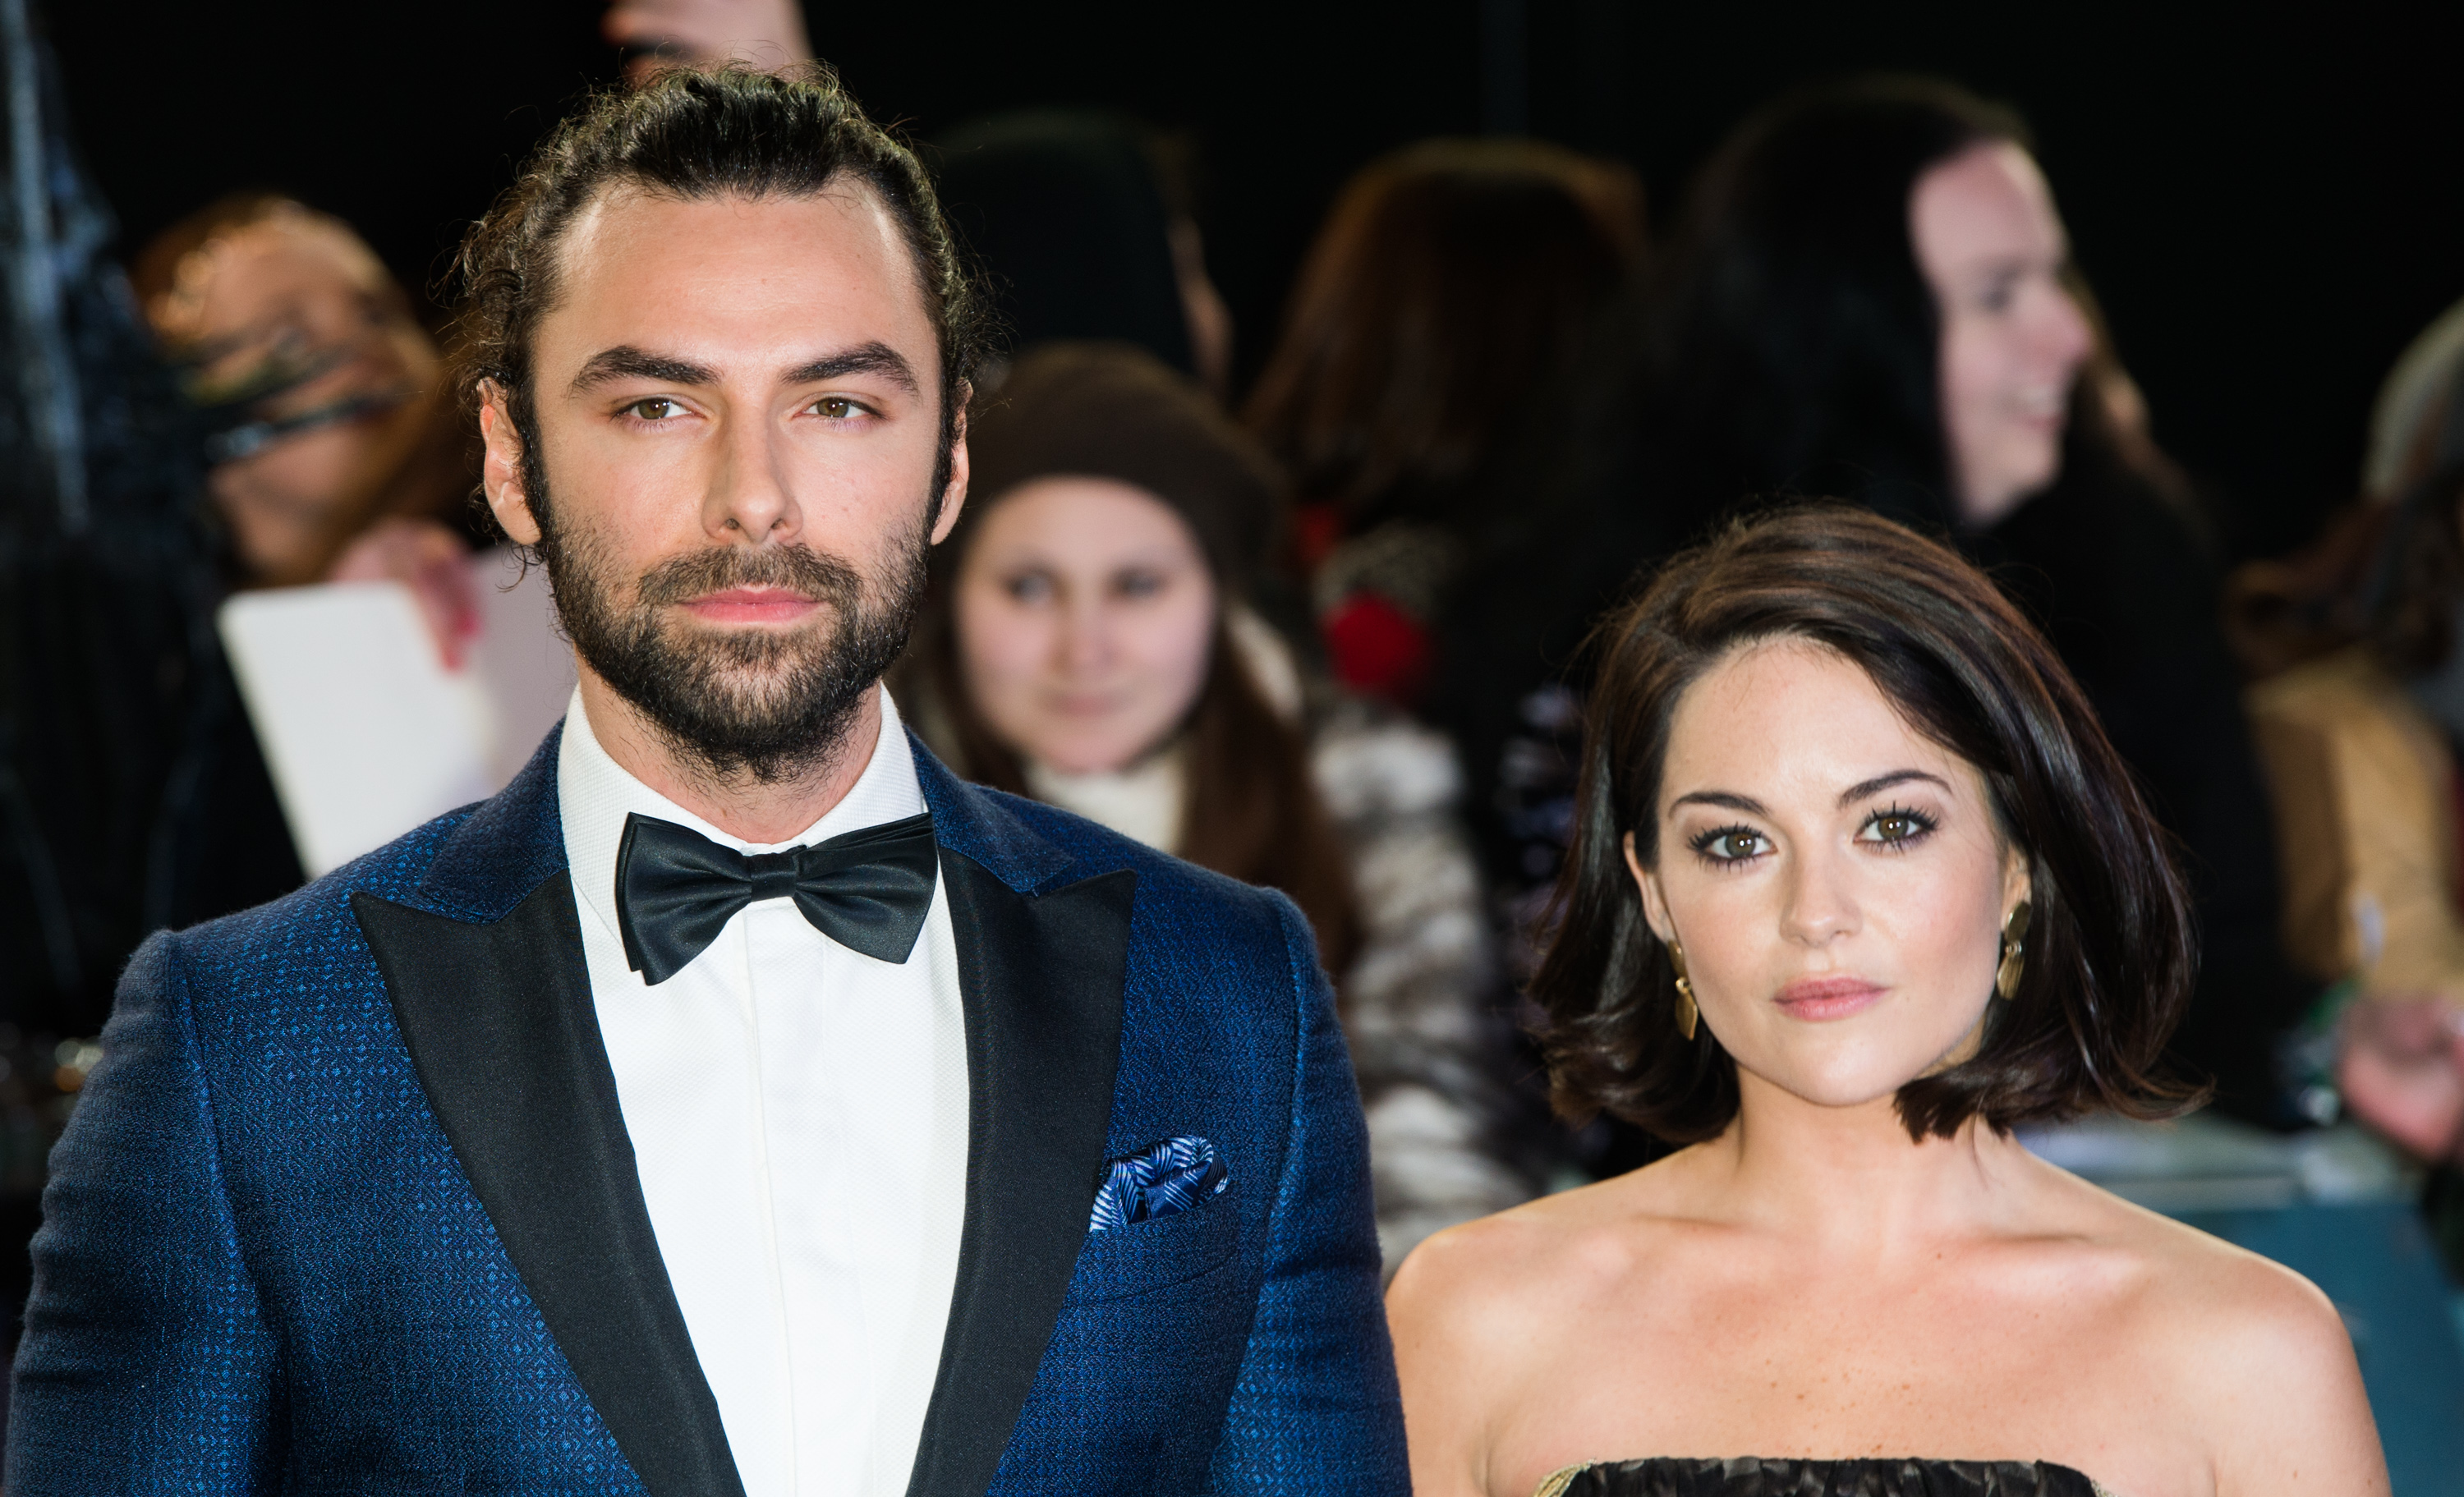 Aidan Turner and Sarah Greene attend the World Premiere of "The Hobbit: The Battle OF The Five Armies" at Odeon Leicester Square on December 1, 2014 in London, England | Source: Getty Images